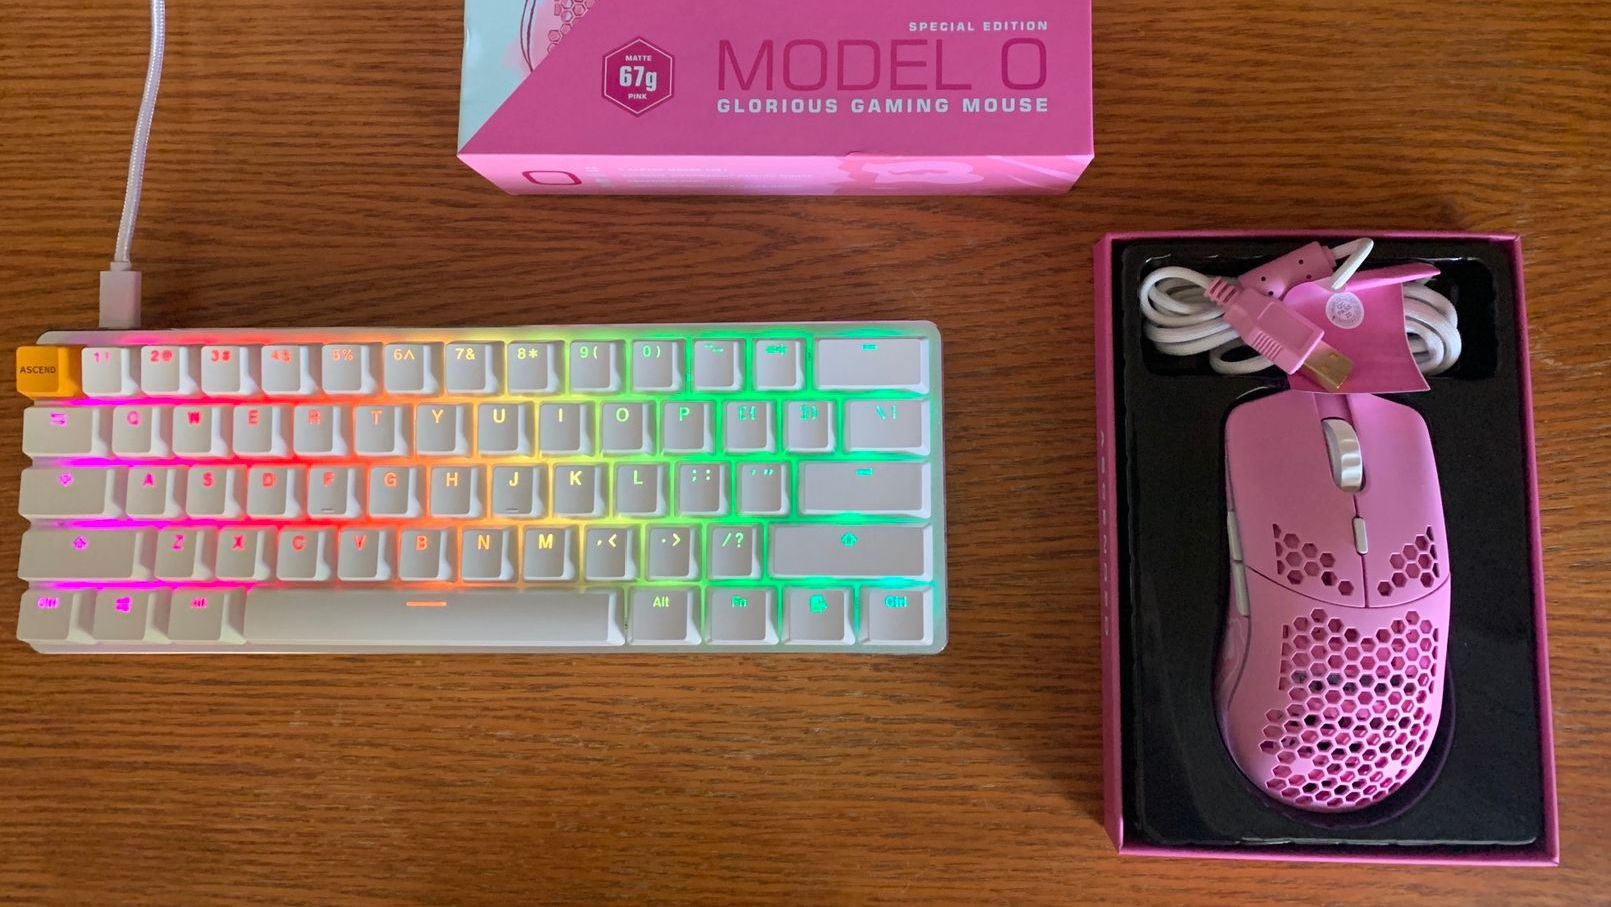 Glorious Pc Gaming Pink Model O Gmmk White Ice Edition Discord Server Check Out This Sweet Pink And White Ice Combo Posted To Our Discord Have You